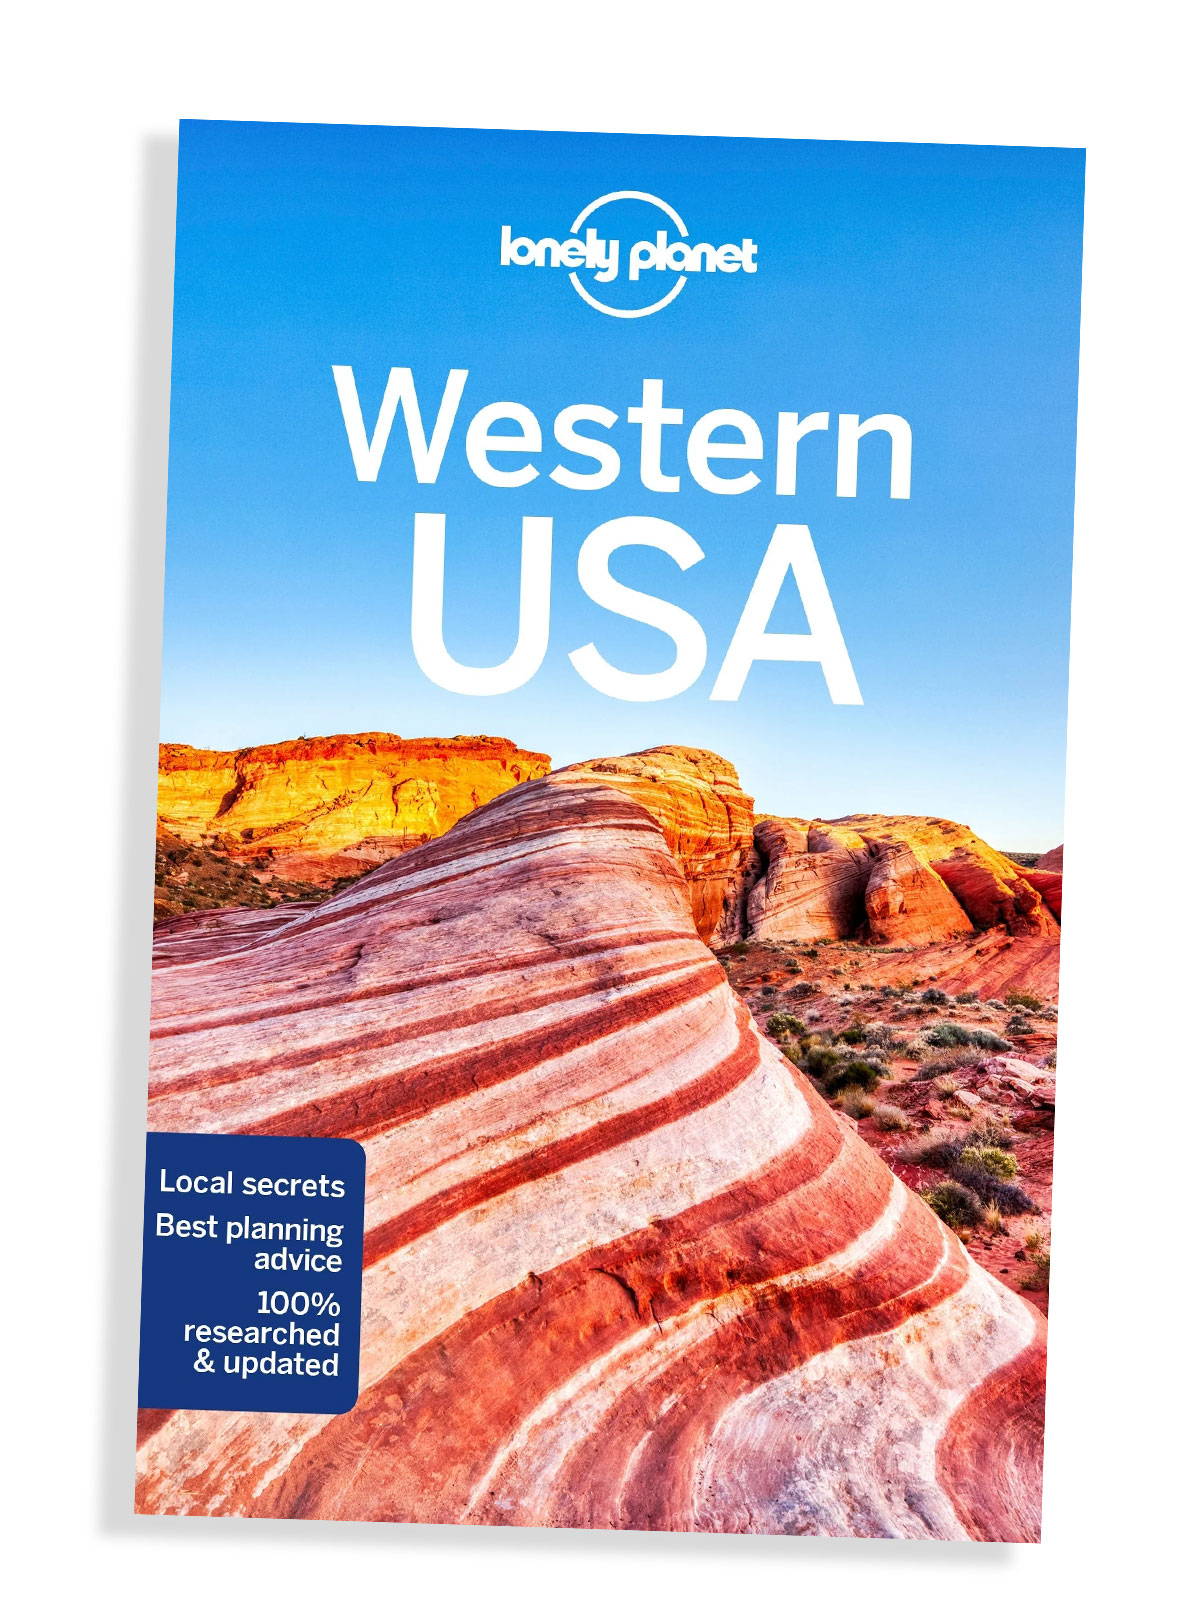 Western USA Lonely Planet